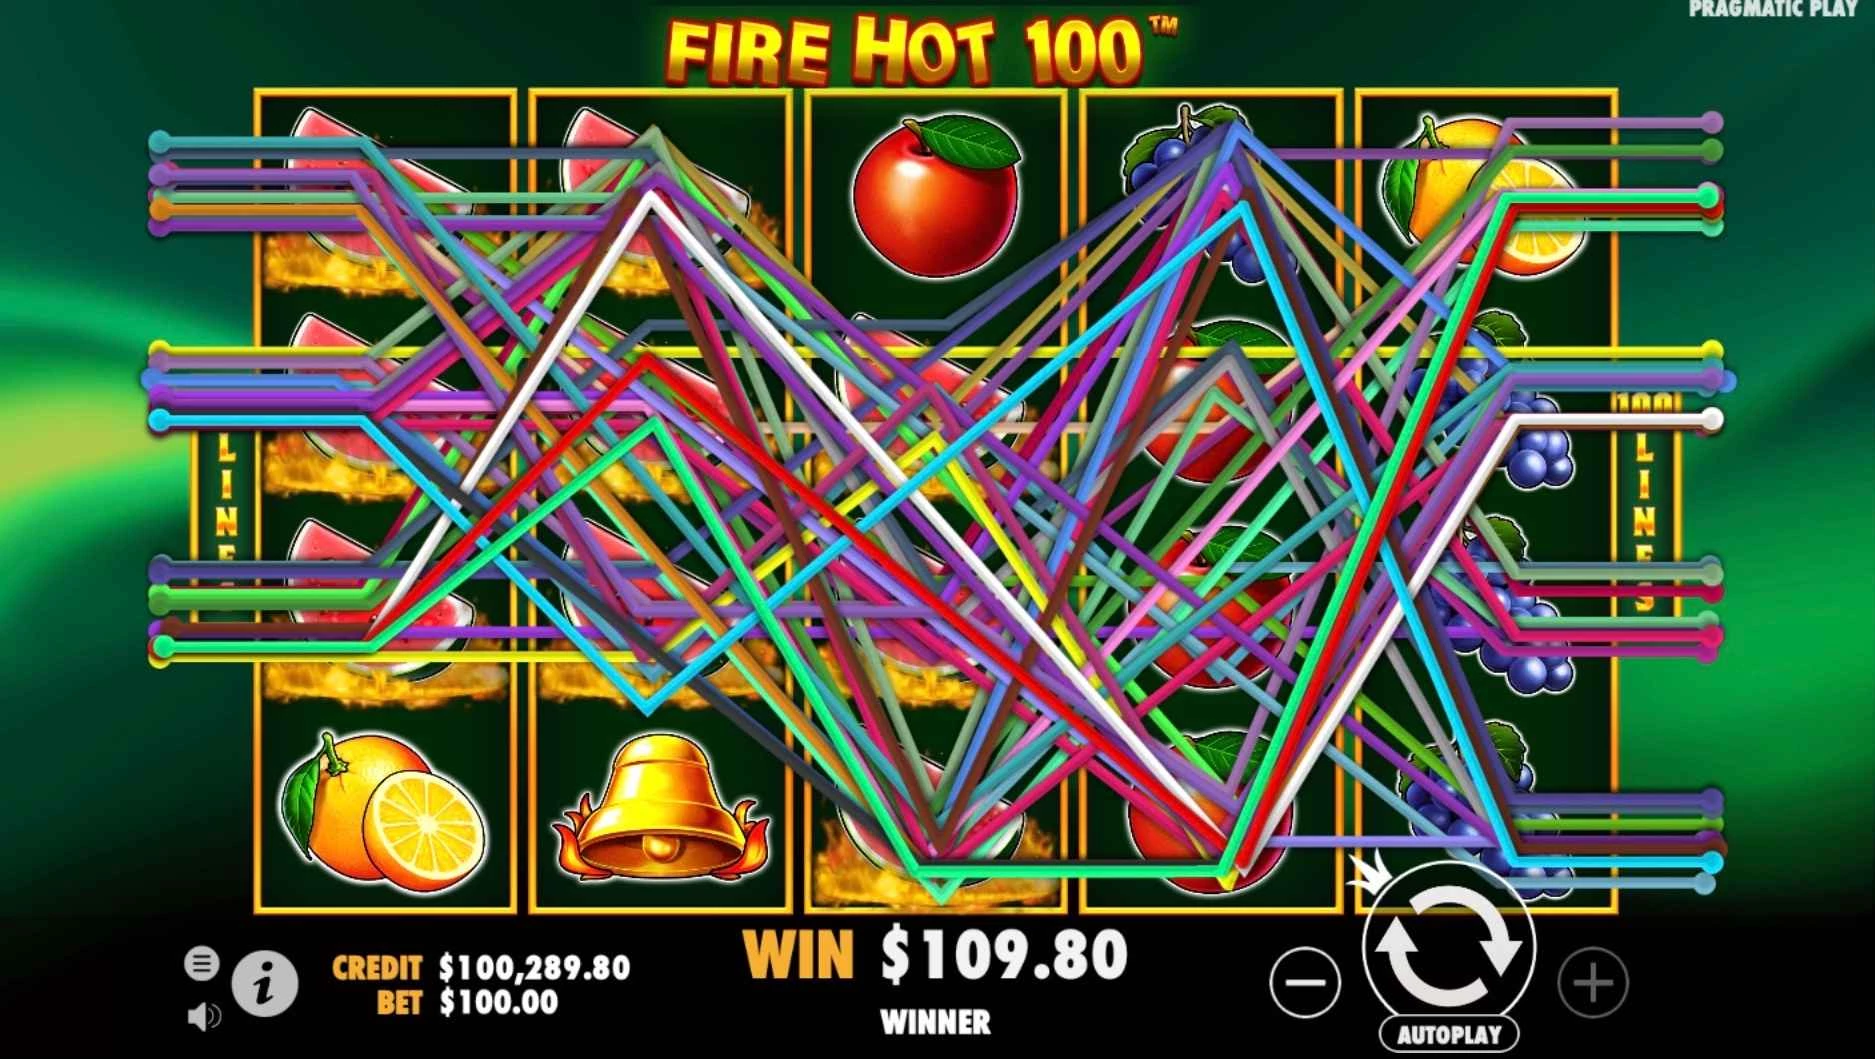 Fire Hot 100 Slot by Pragmatic Play - Many Lines